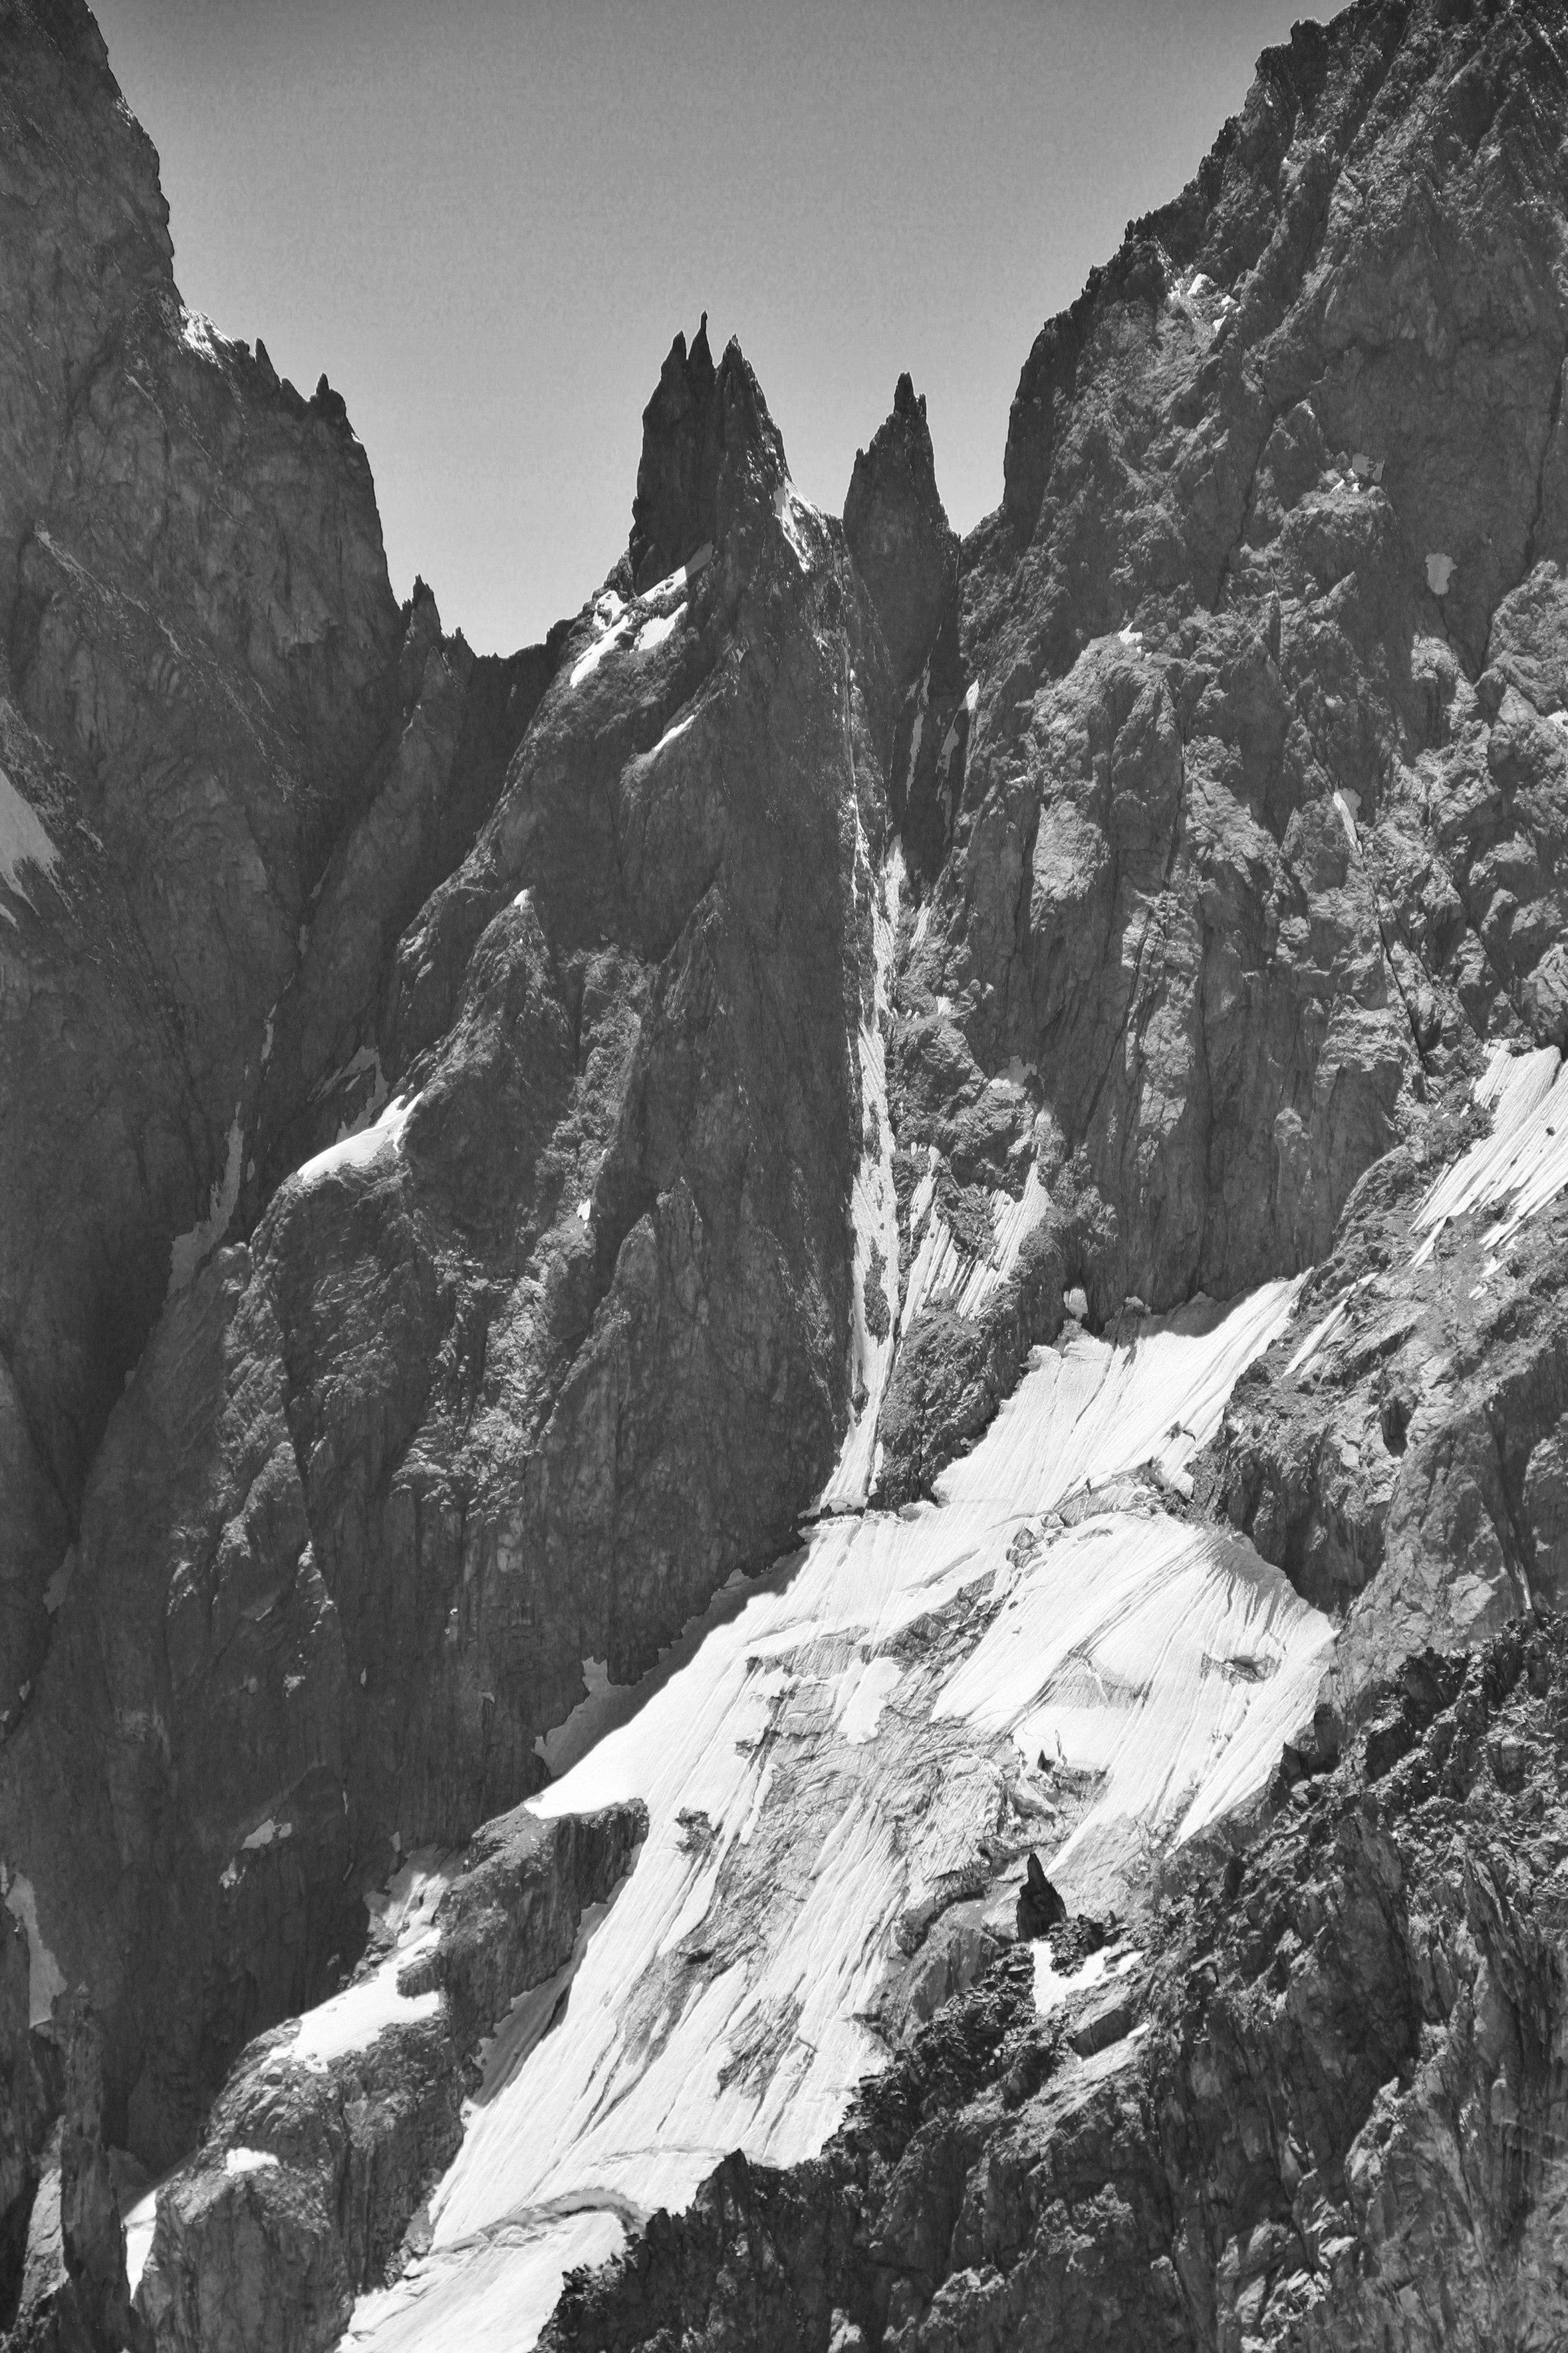 Les Dames Anglaises from Punta Helbronner, 2010 July, bw